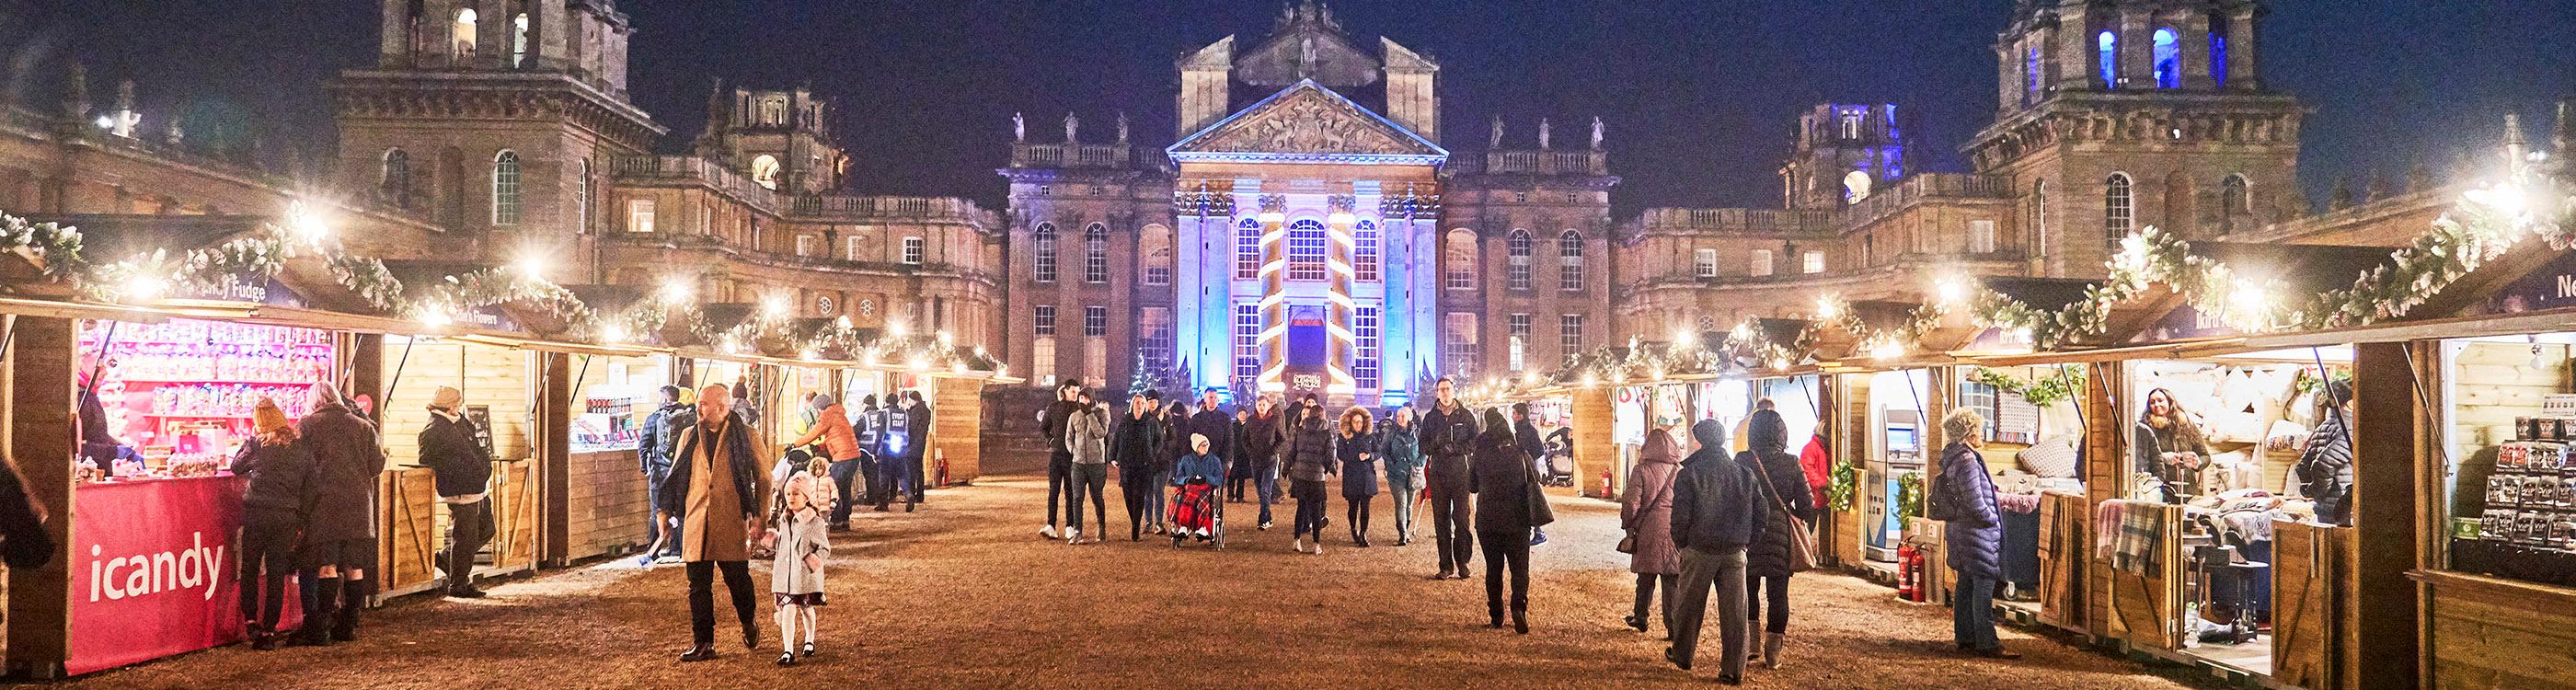 Scenes from the Blenheim Palace Christmas Market